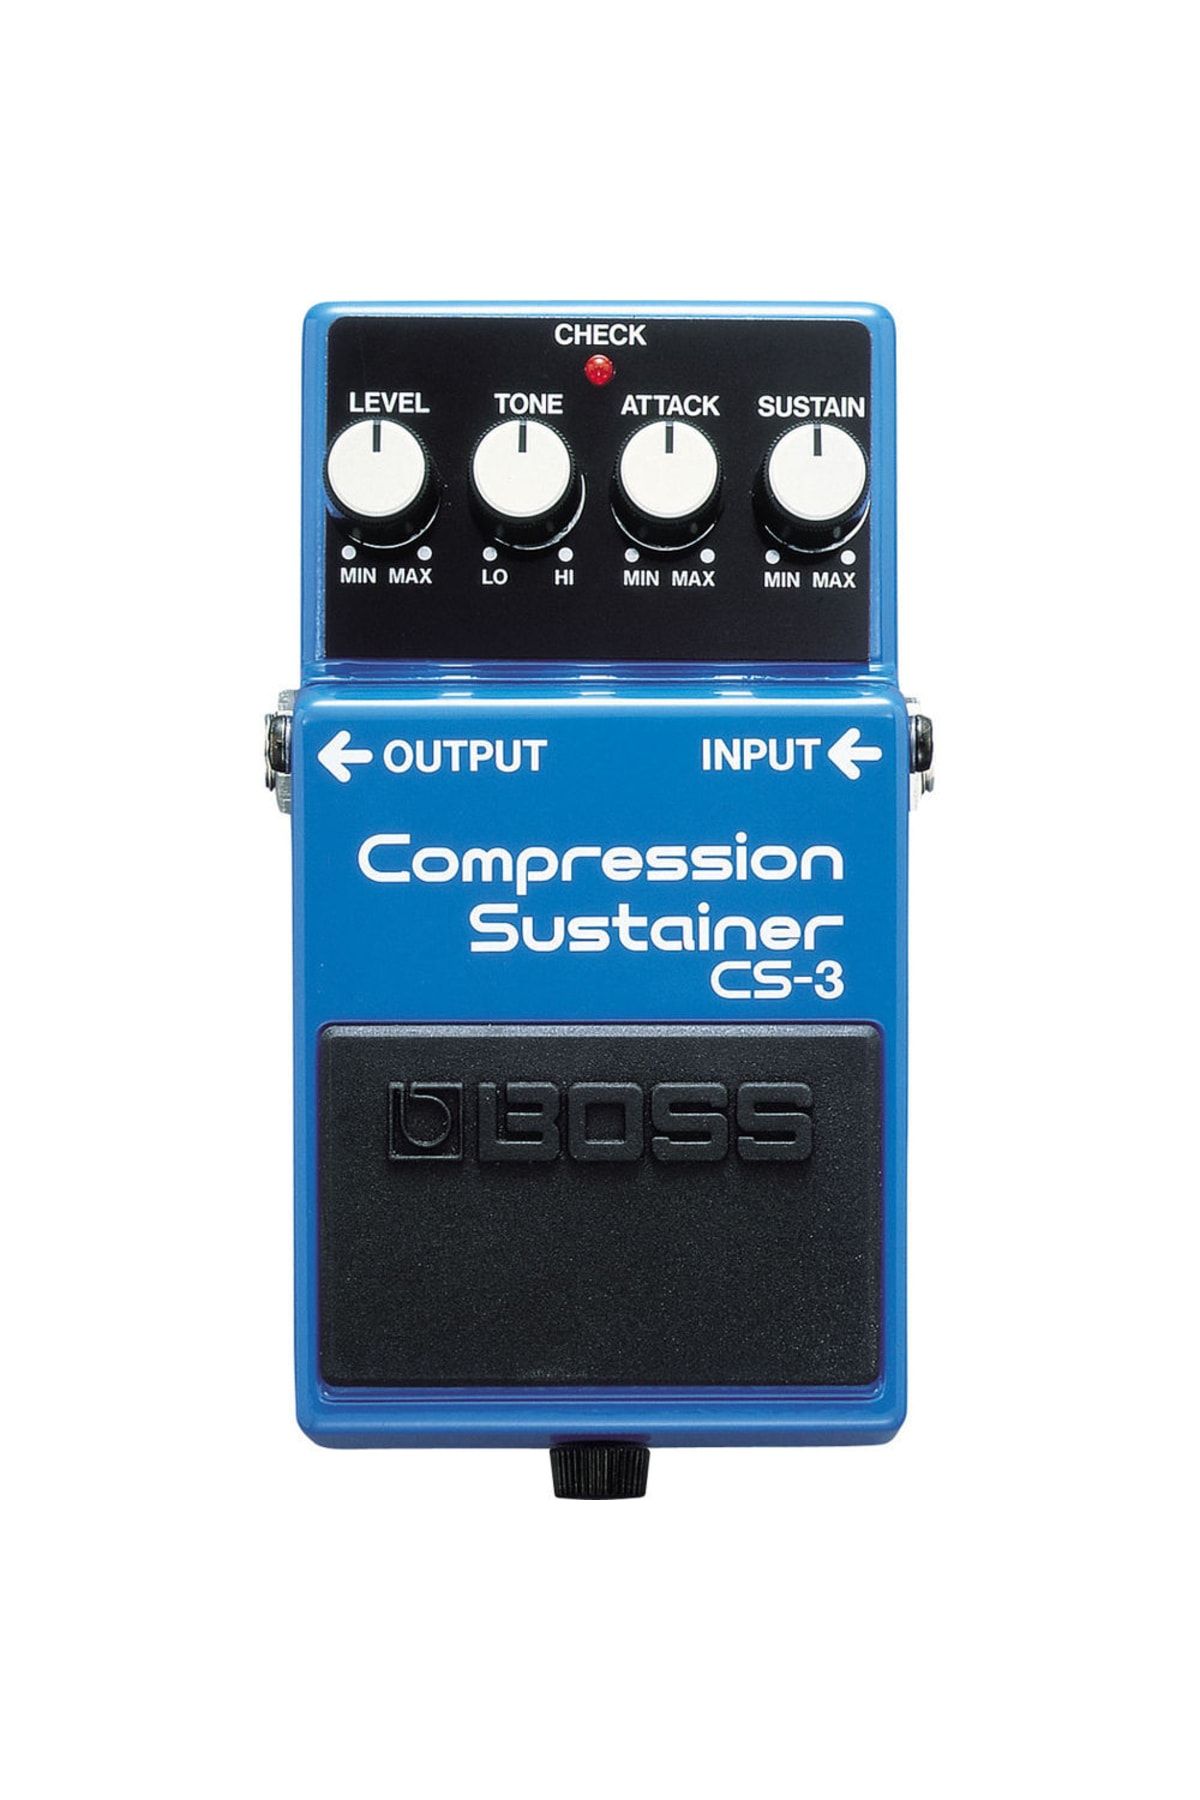 BOSS Cs-3 Compression Sustainer Compact Pedal